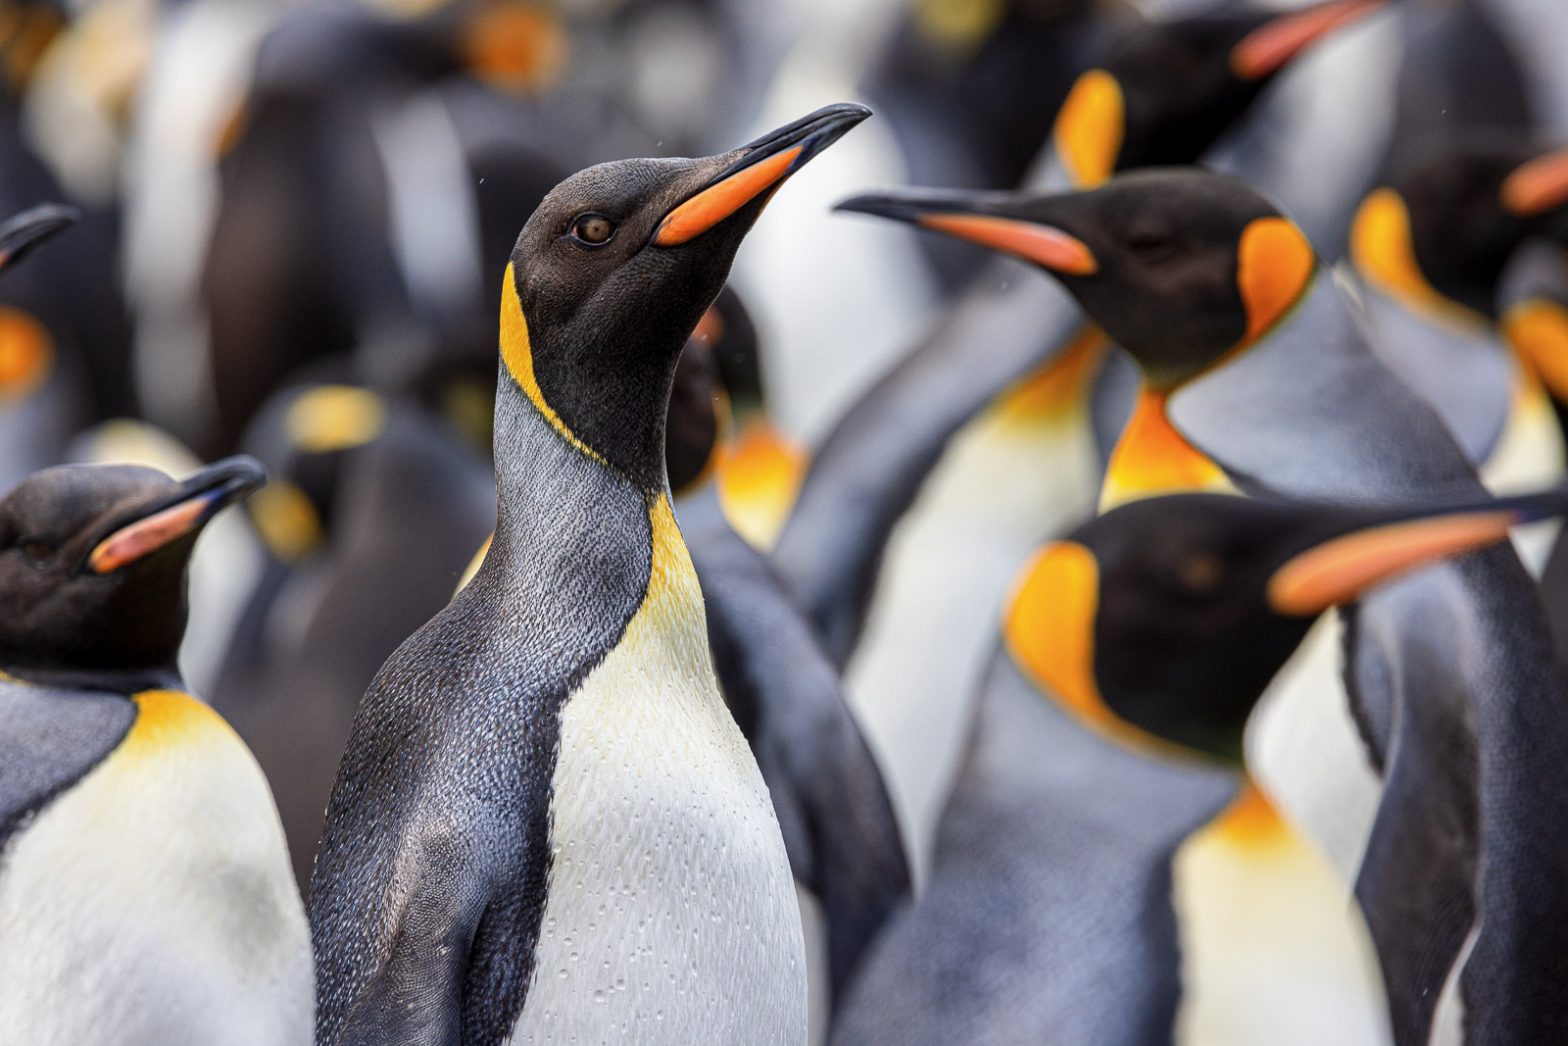 Why are young King Penguins called oakum boys?